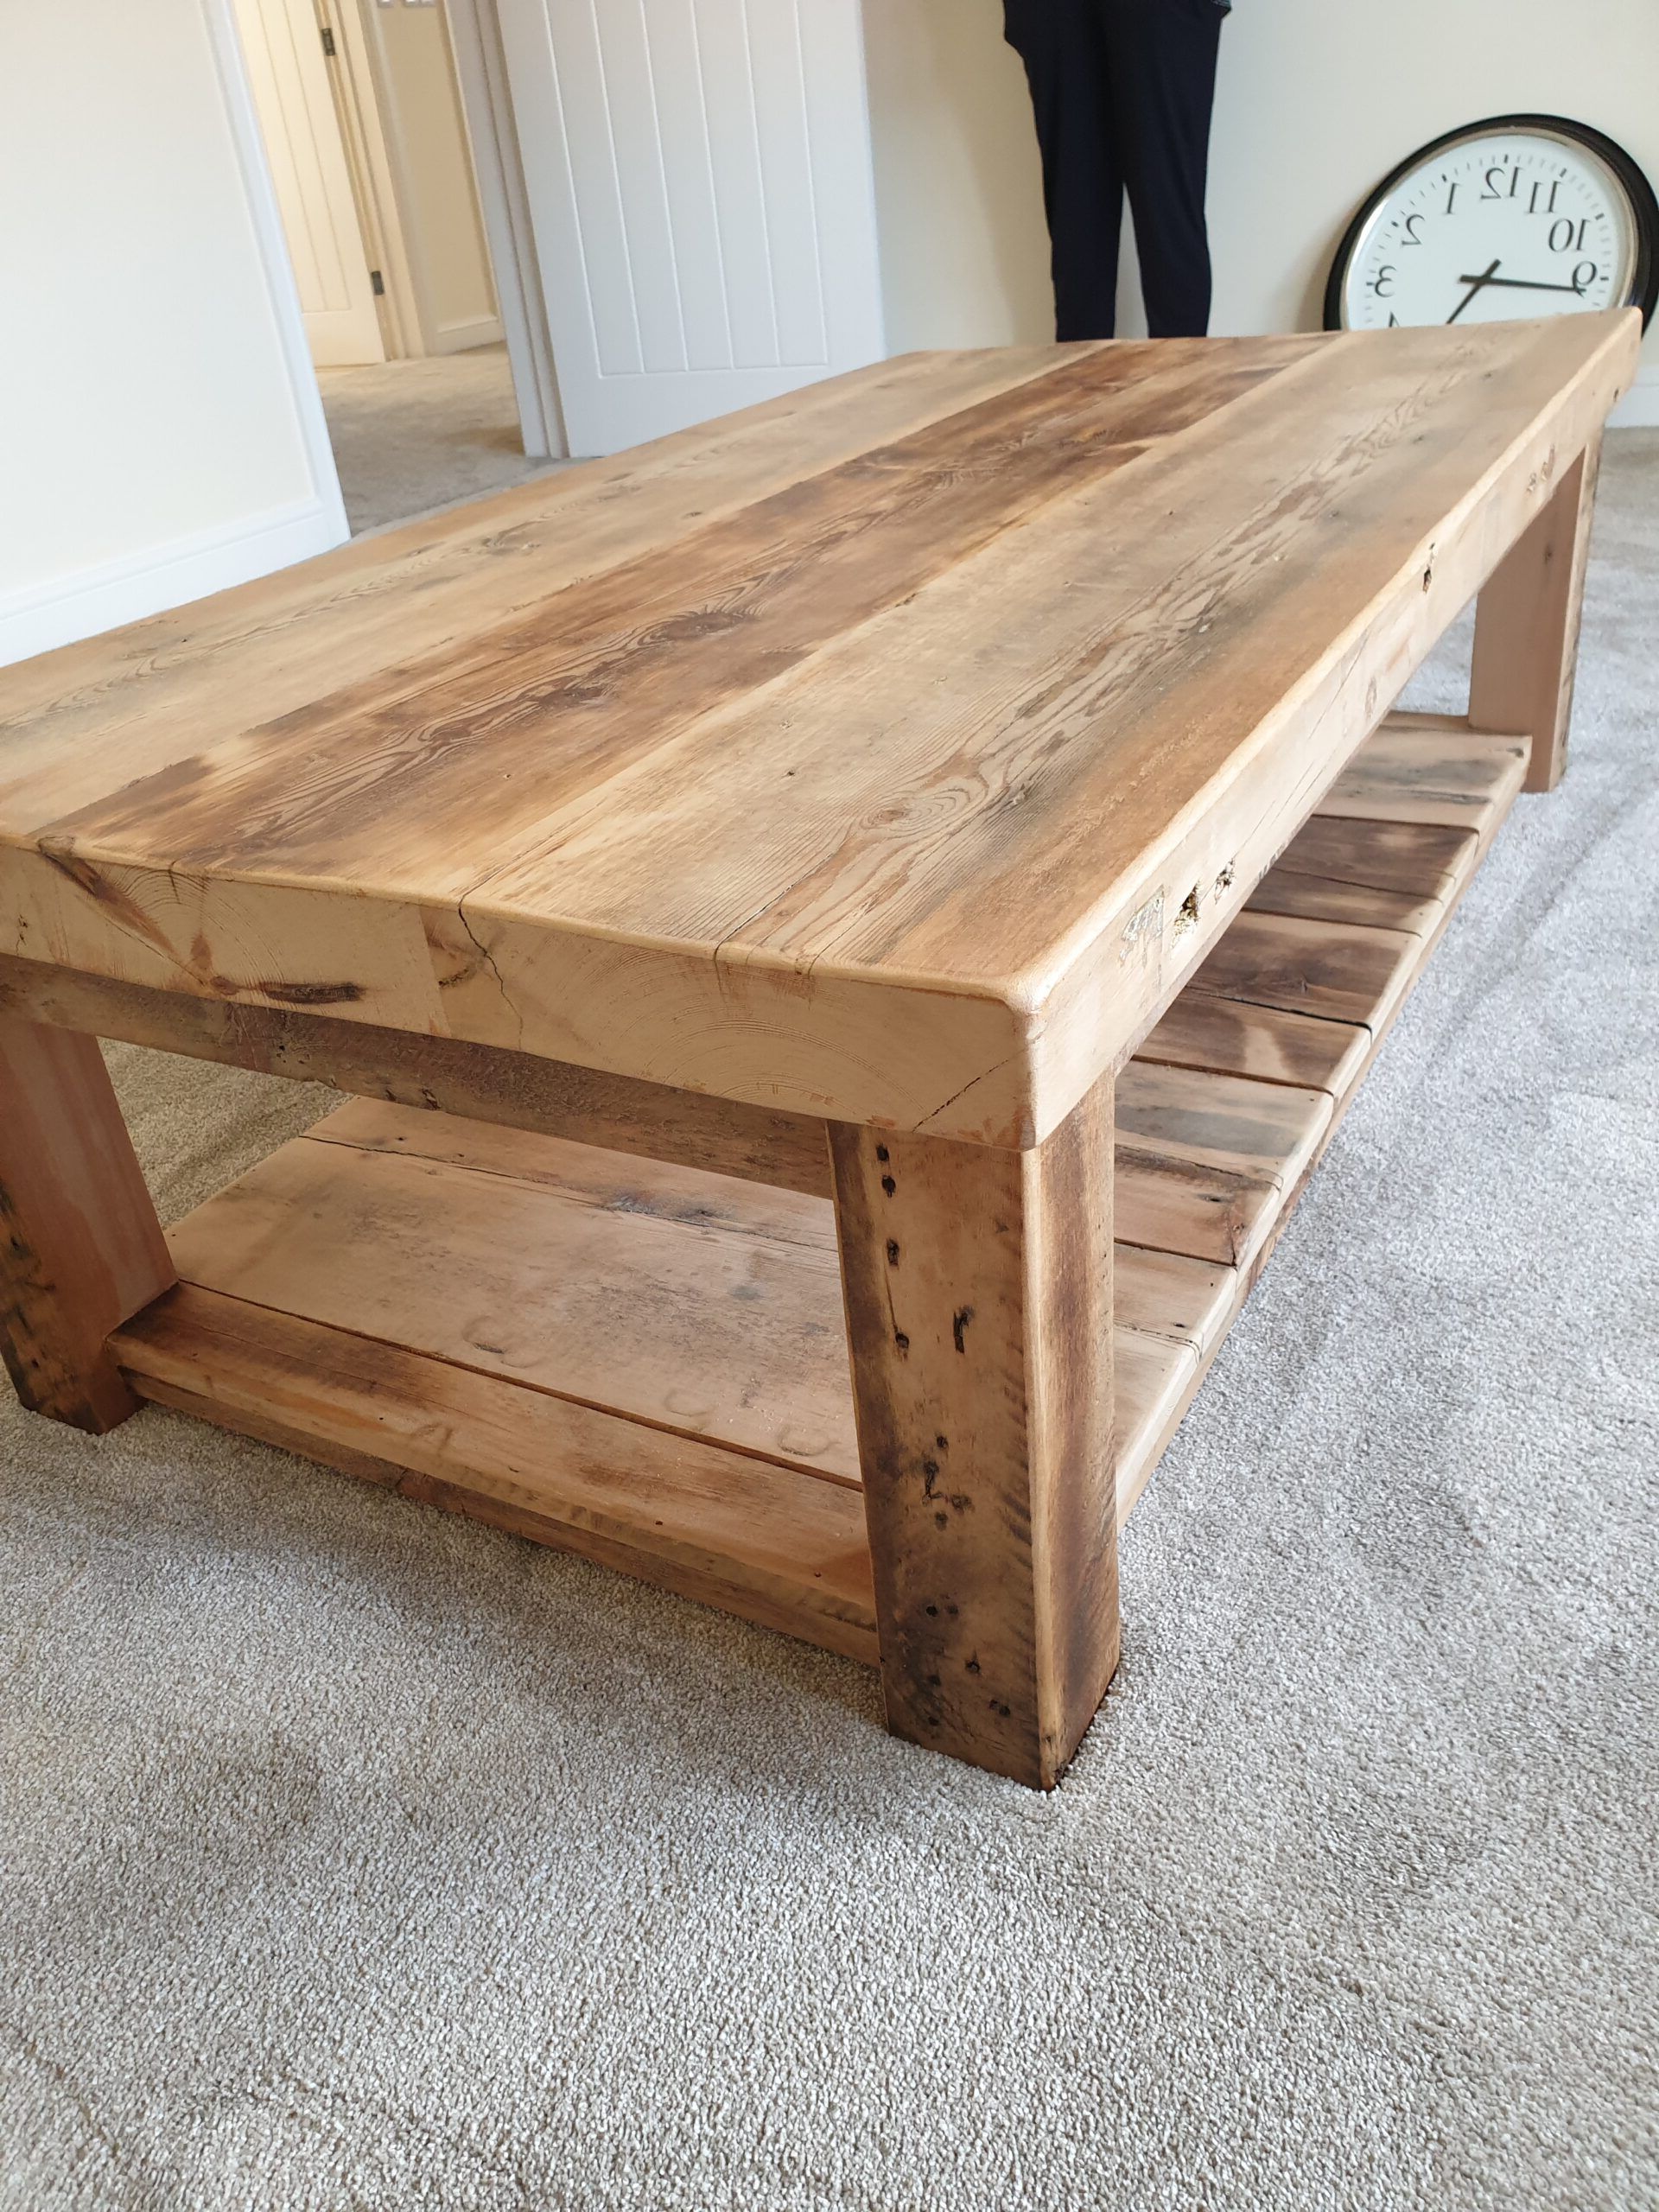 Buy Rustic Wood Coffee Table Made From Reclaimed Timber For 2019 Pemberly Row Replicated Wood Coffee Tables (View 8 of 15)